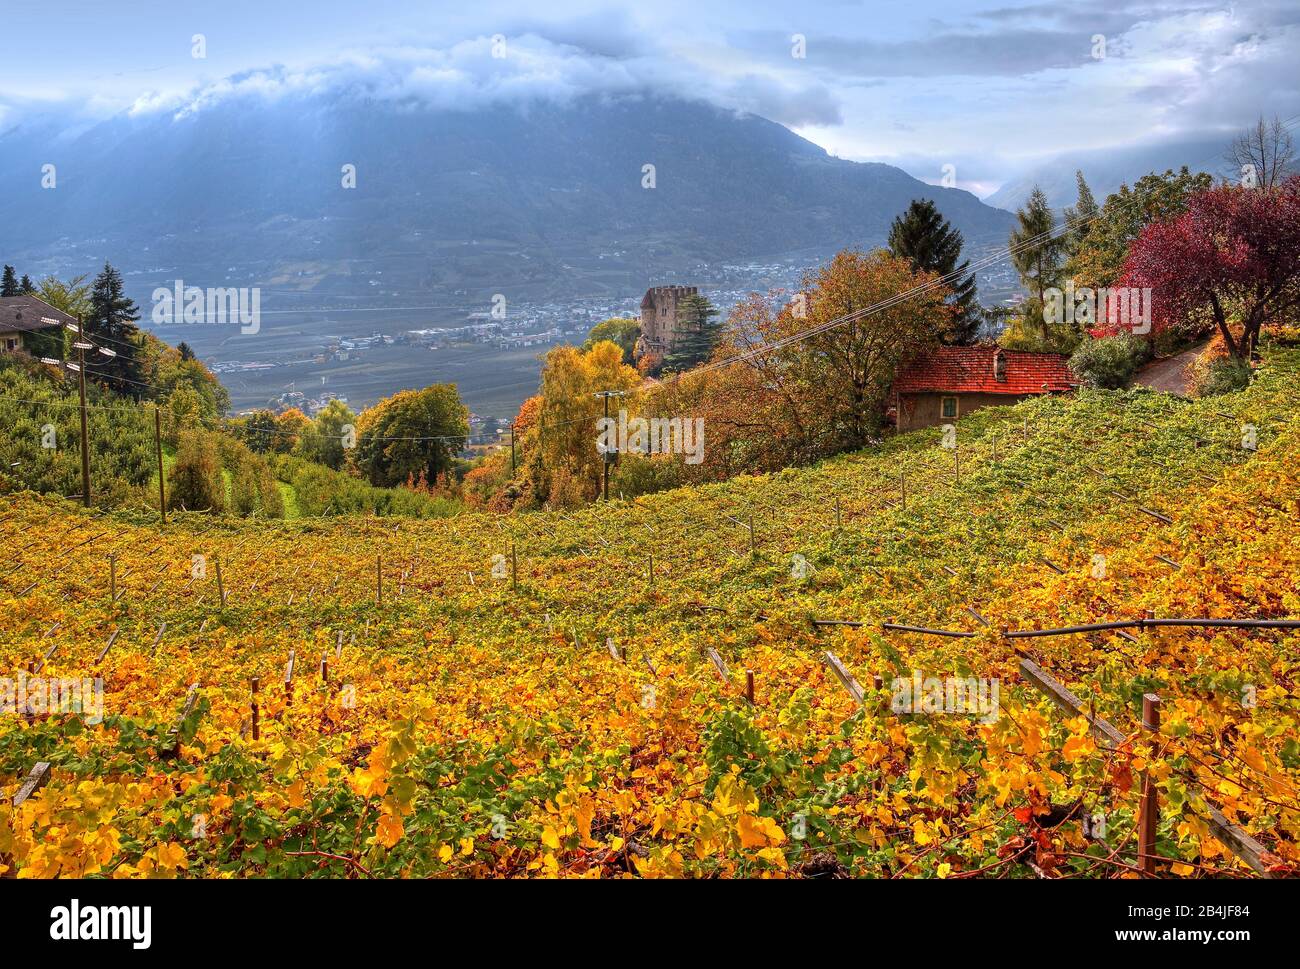 Vineyard with the Brunnenburg and view of the Adige Valley, Dorf Tirol, Burggrafenamt, South Tyrol, Italy Stock Photo